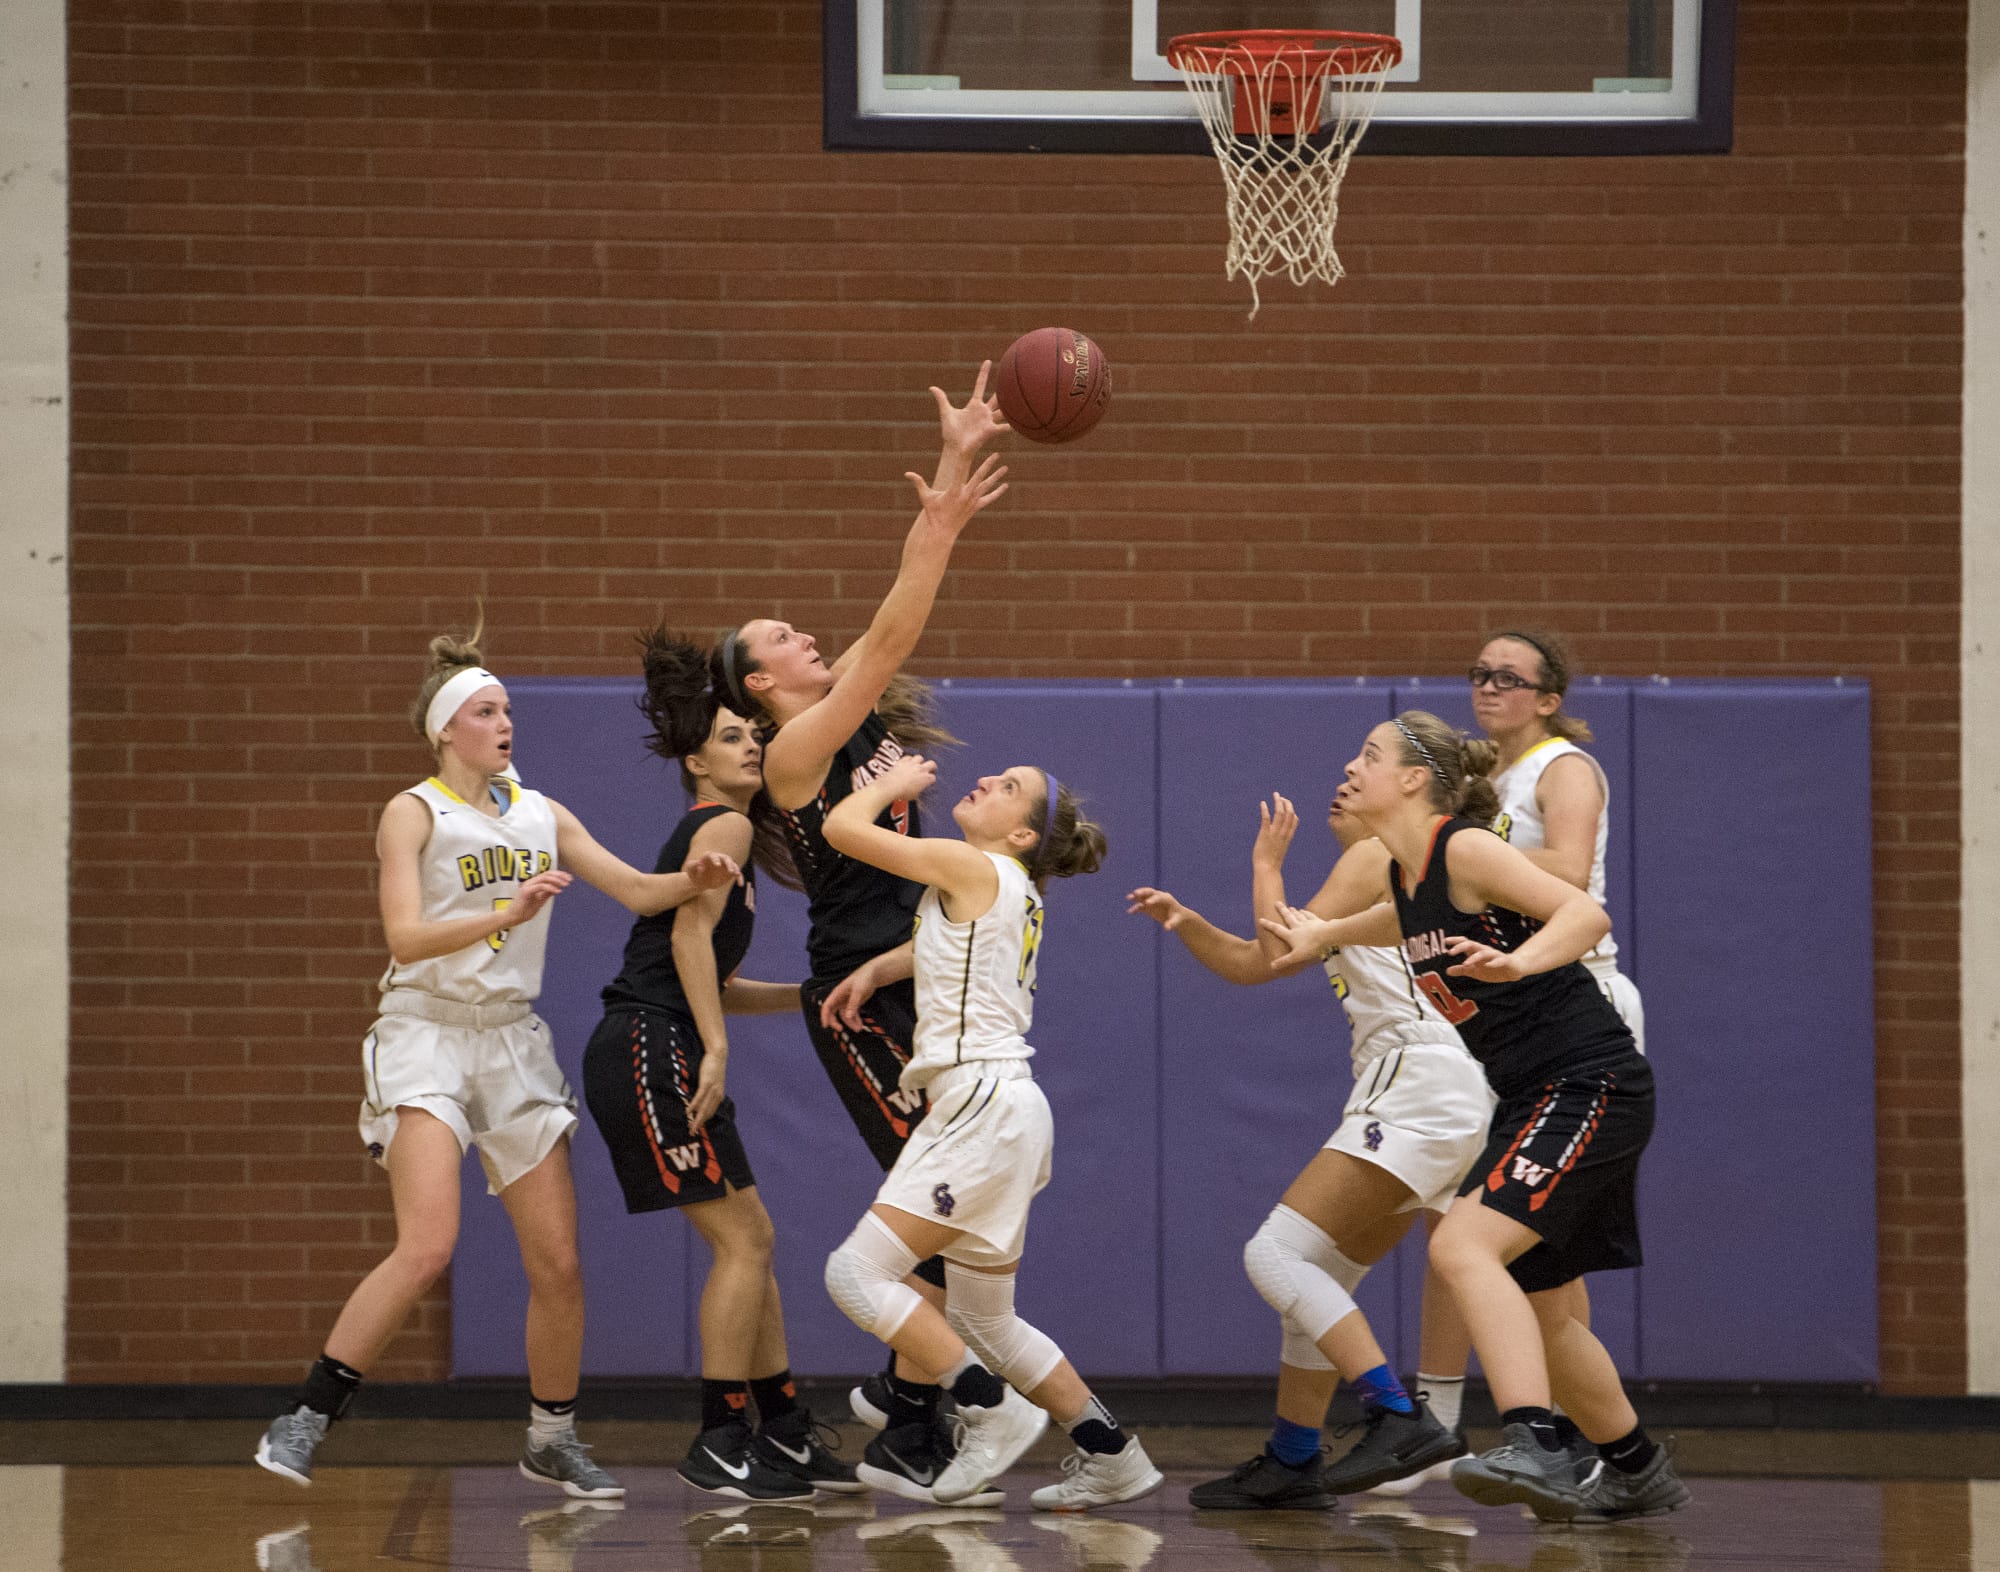 Washougal's Beyonce Bea (5) leaps up for a defensive rebound during Thursday night's game at Columbia River High School on Feb. 1, 2018. Washougal won 54-53.